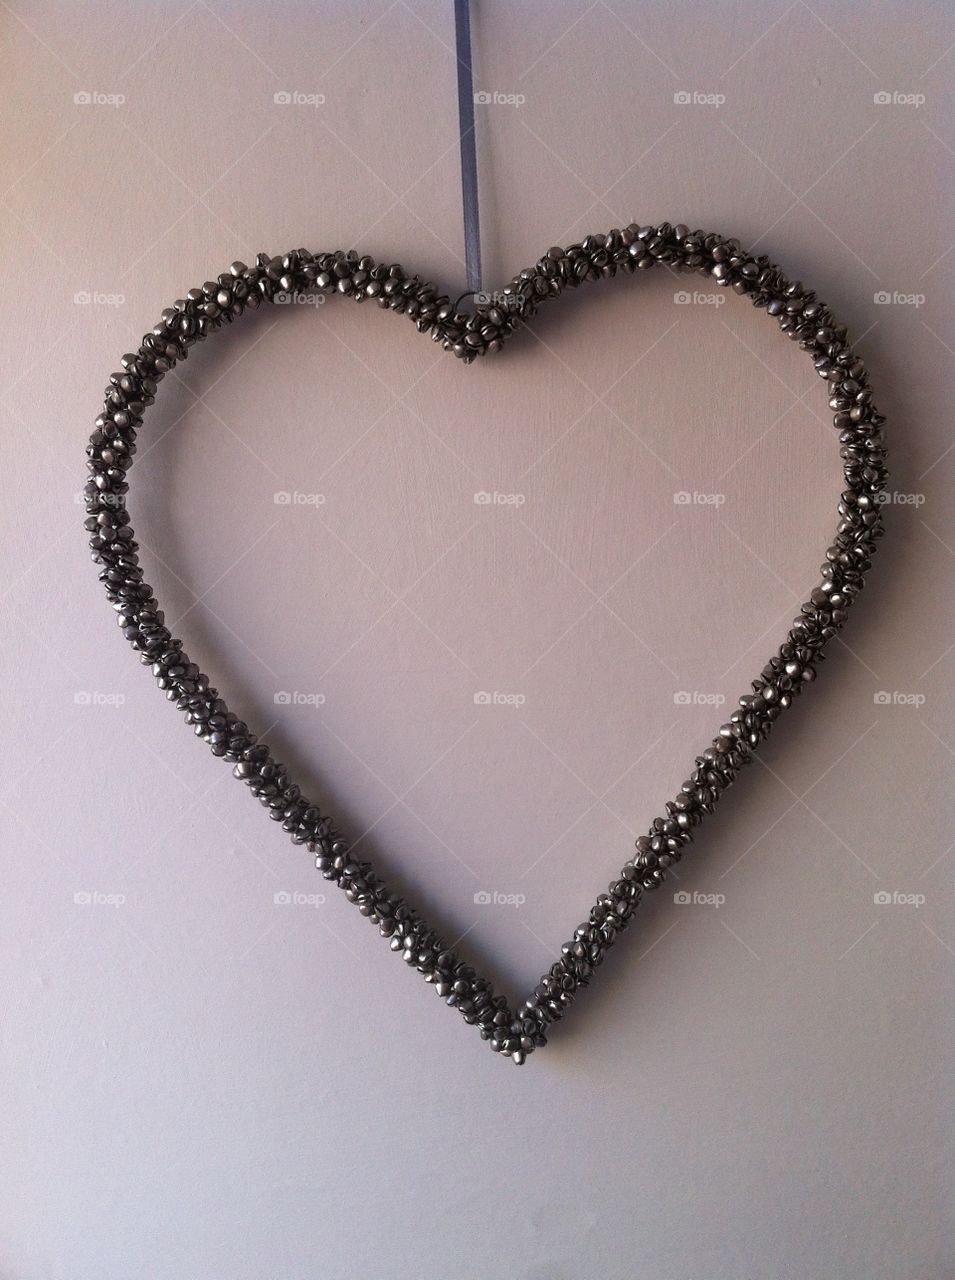 Bead Love Heart. Love heart decoration with some flavour 